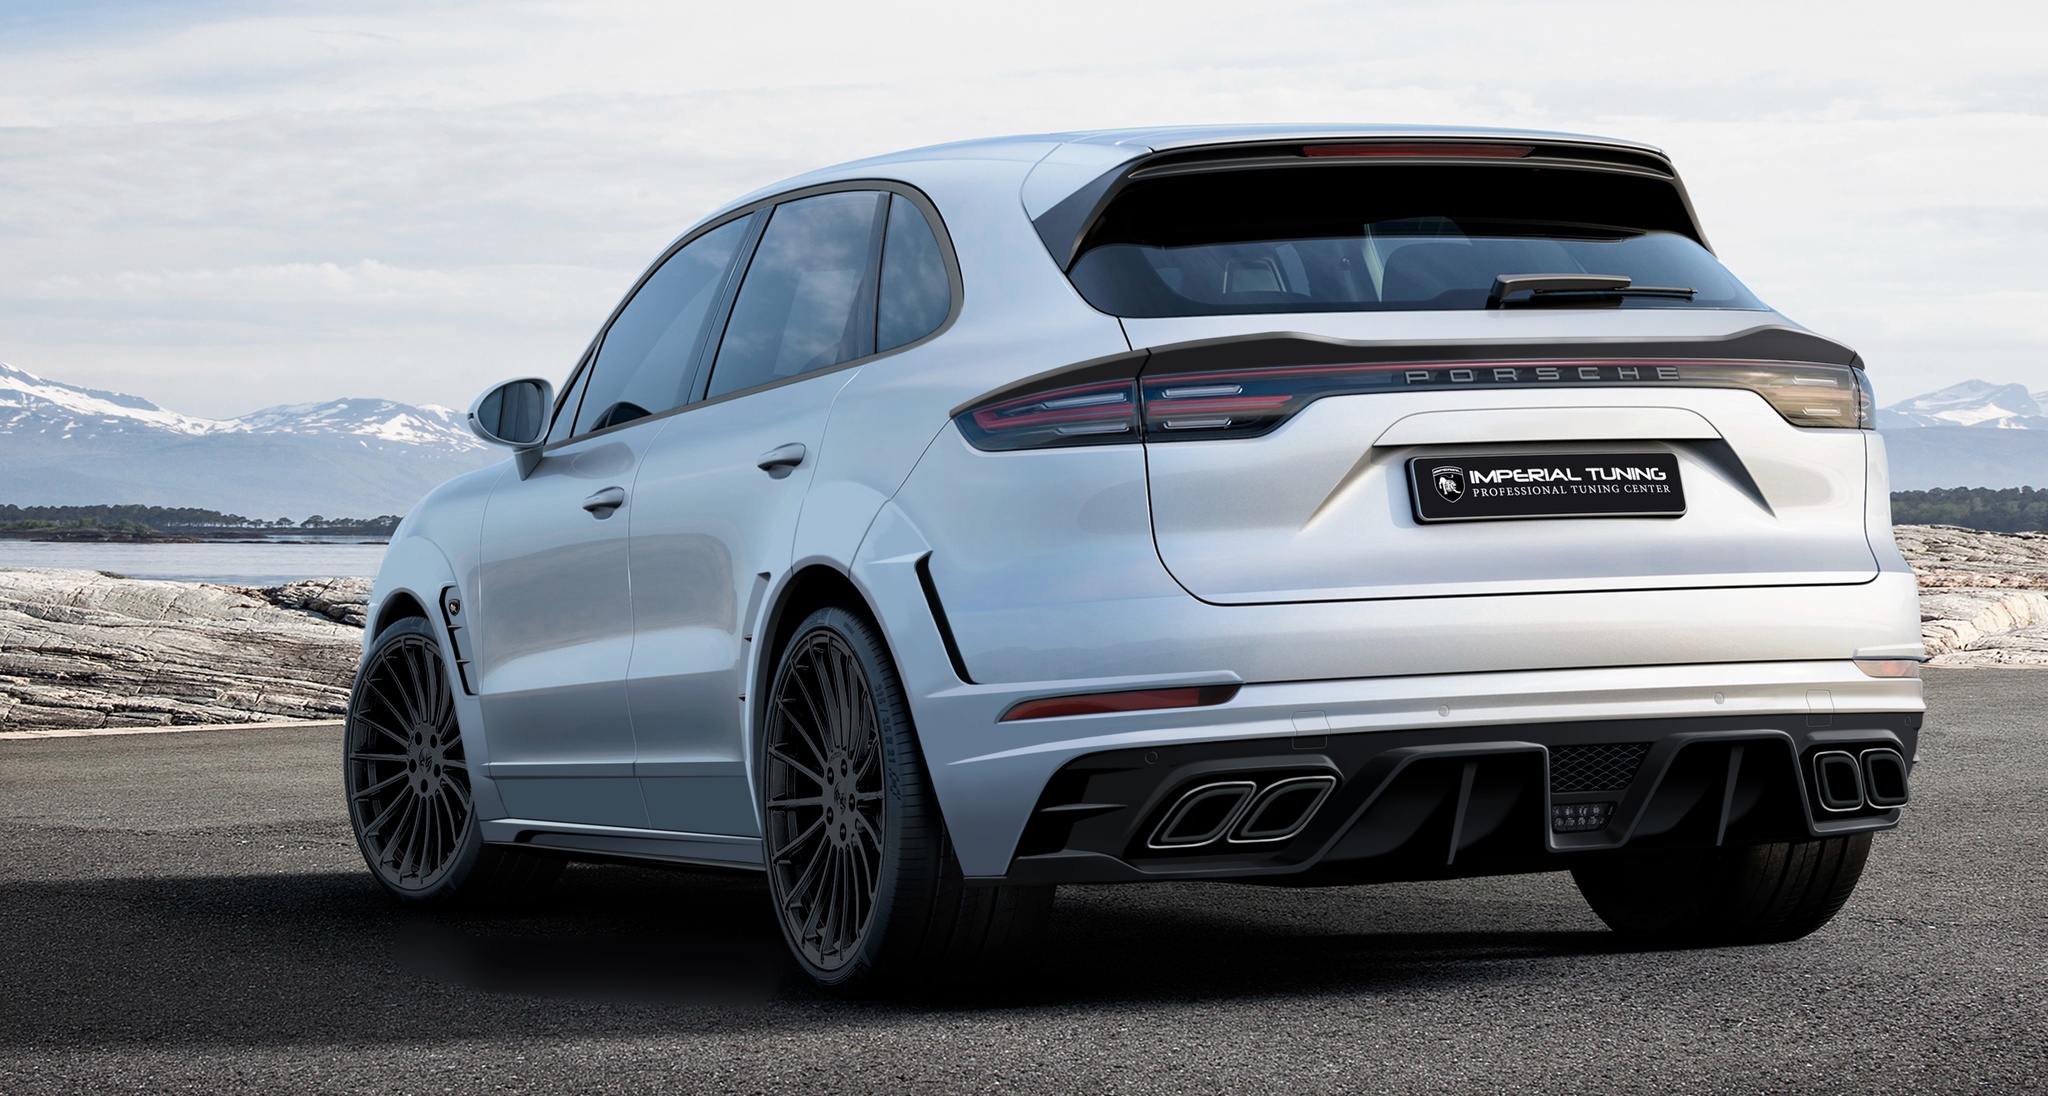 Imperial body kit for Porsche Cayenne 959 Turbo 3